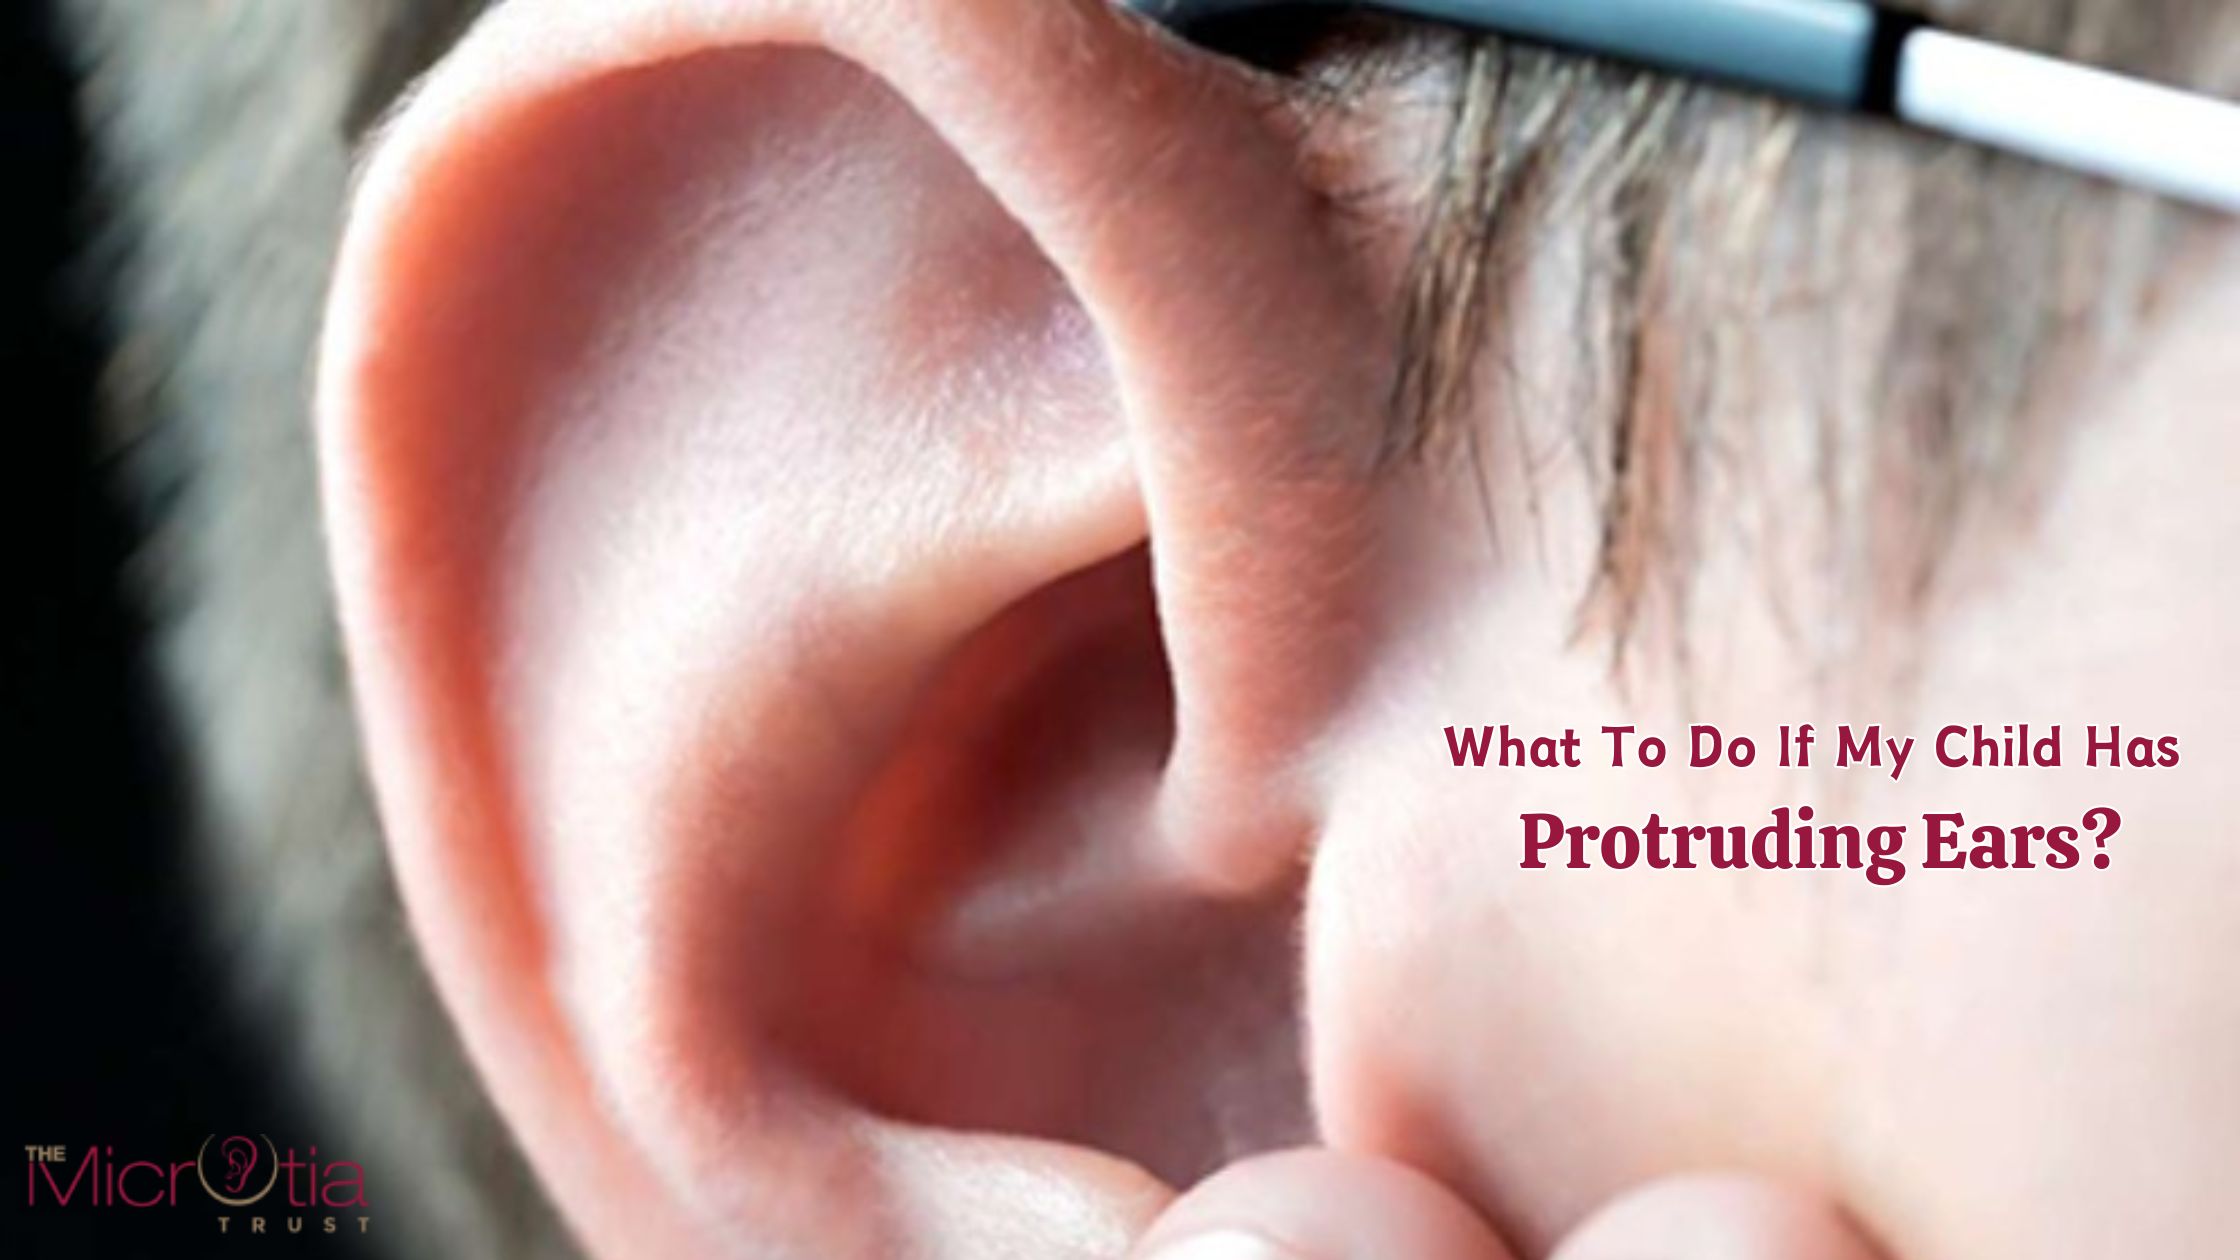 What To Do If My Child Has Protruding Ears